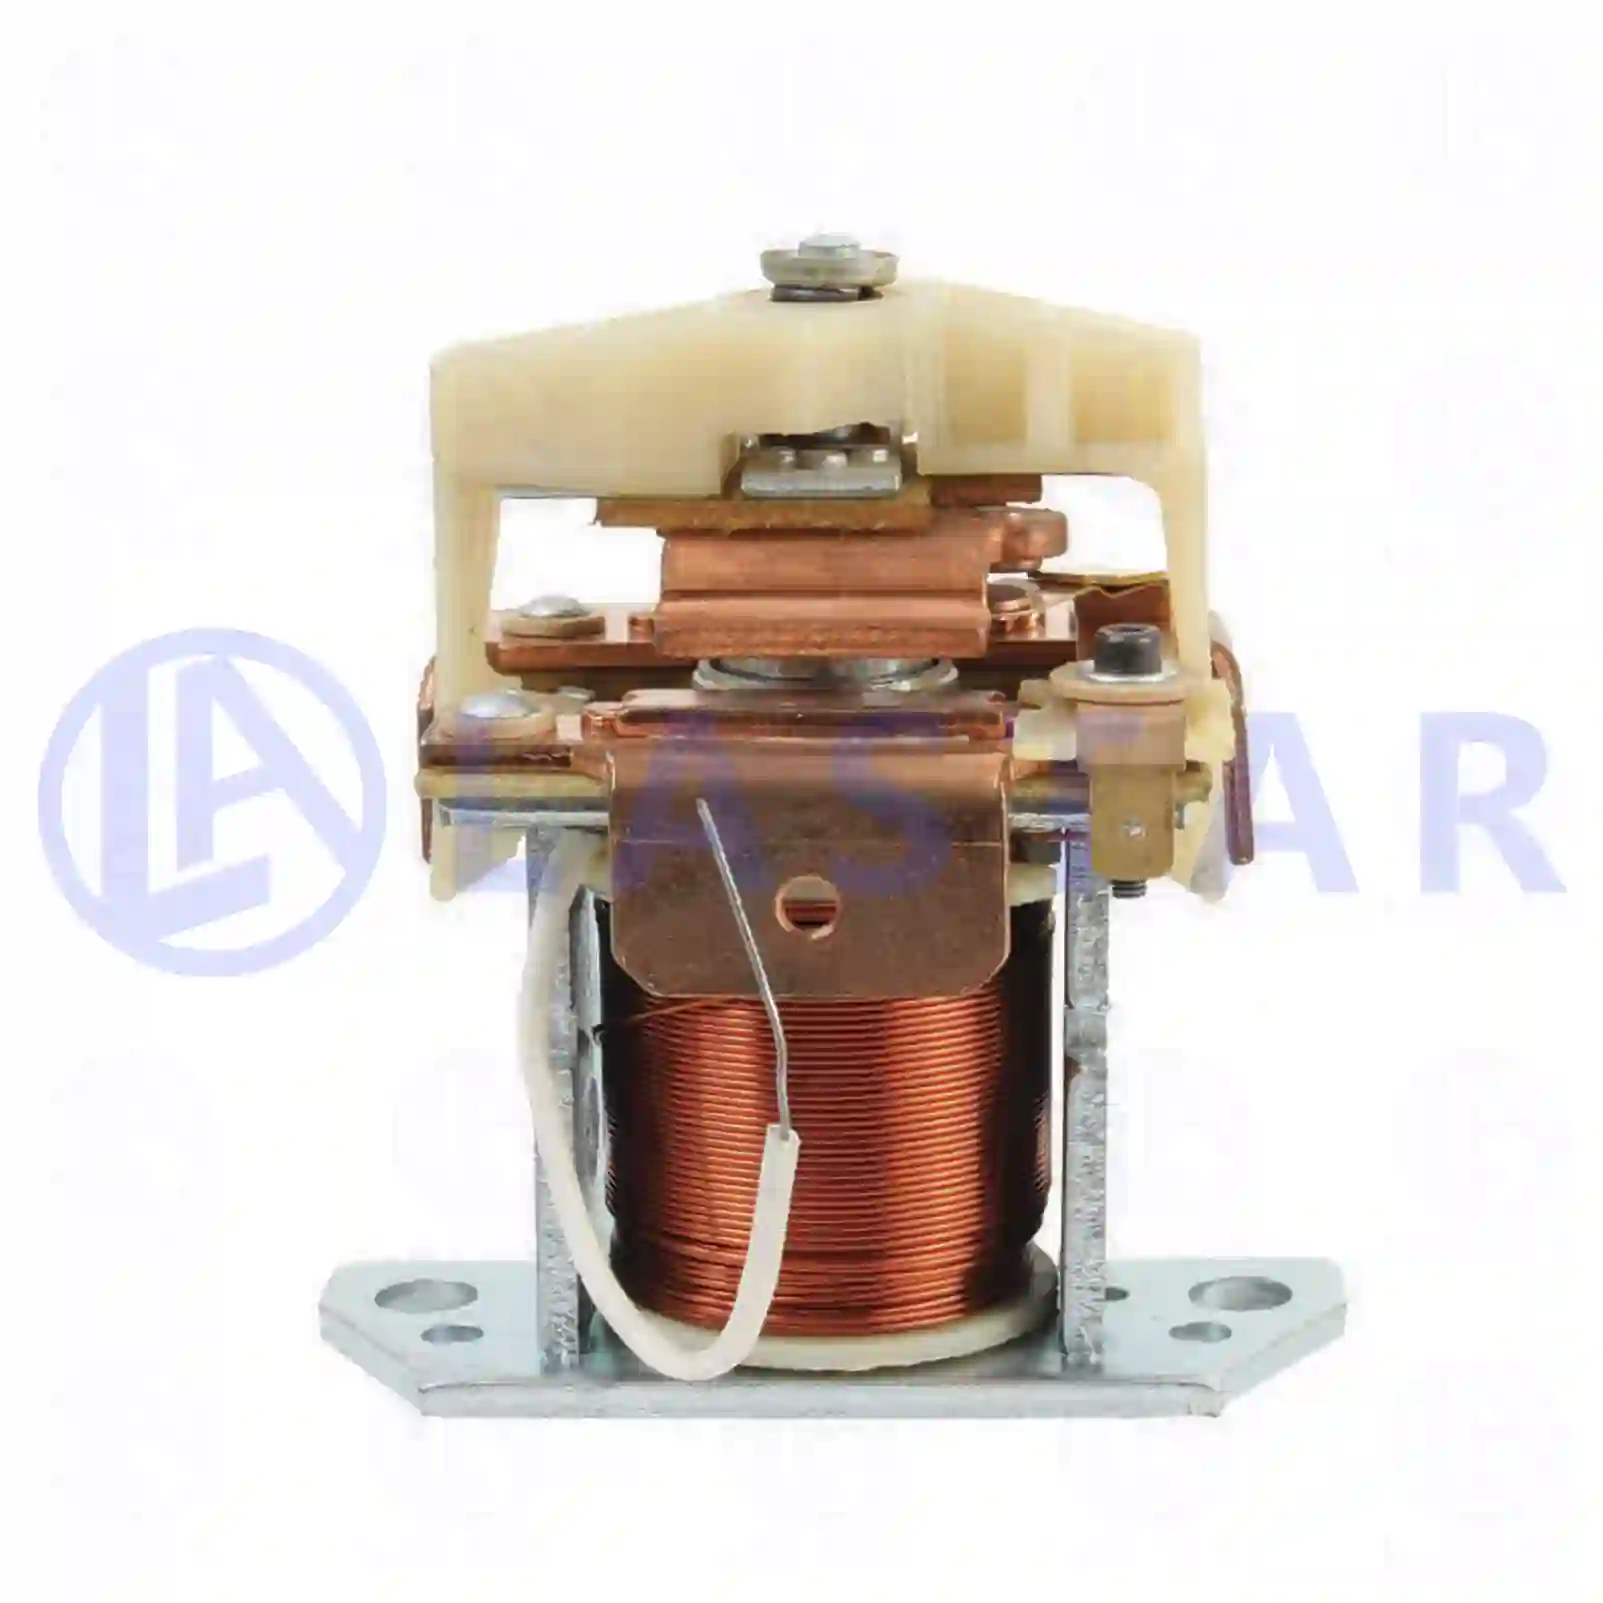 Electrical System Solenoid switch, la no: 77710595 ,  oem no:79052269, E067192, 2Y-2397, 0252120, 0607080, 252120, 607080, 08122159, 09920699, 79052269, 4792458, 08122159, 09920669, 75207432, 79052269, 79850017, 82274432, 6107232, F441191, 434710, 460541, 08122159, 09920699, 5000587447, 79052269, 01298635, 02985107, 09920699, 09920669, 79052269, 79850017, 82274432, 6107039, 610703908, 81262120011, 81262120014, 81262120020, 90816160363, 0001524010, 0001525010, 0011529010, 008001740002, 008001750001, 008332560005, 008362100001, 607424060042, F0441191, 5000571447, 5000587447, 5100140324, 7701004960, 296190751, 5000587447, 7701004960, 193511, 238805, 238924, 533344, 5000587447, 7701004960, 614090727, 009920699, 061652785, 061653569, 061654781, 240488, 241897, 7240488, ZG20916-0008 Lastar Spare Part | Truck Spare Parts, Auotomotive Spare Parts